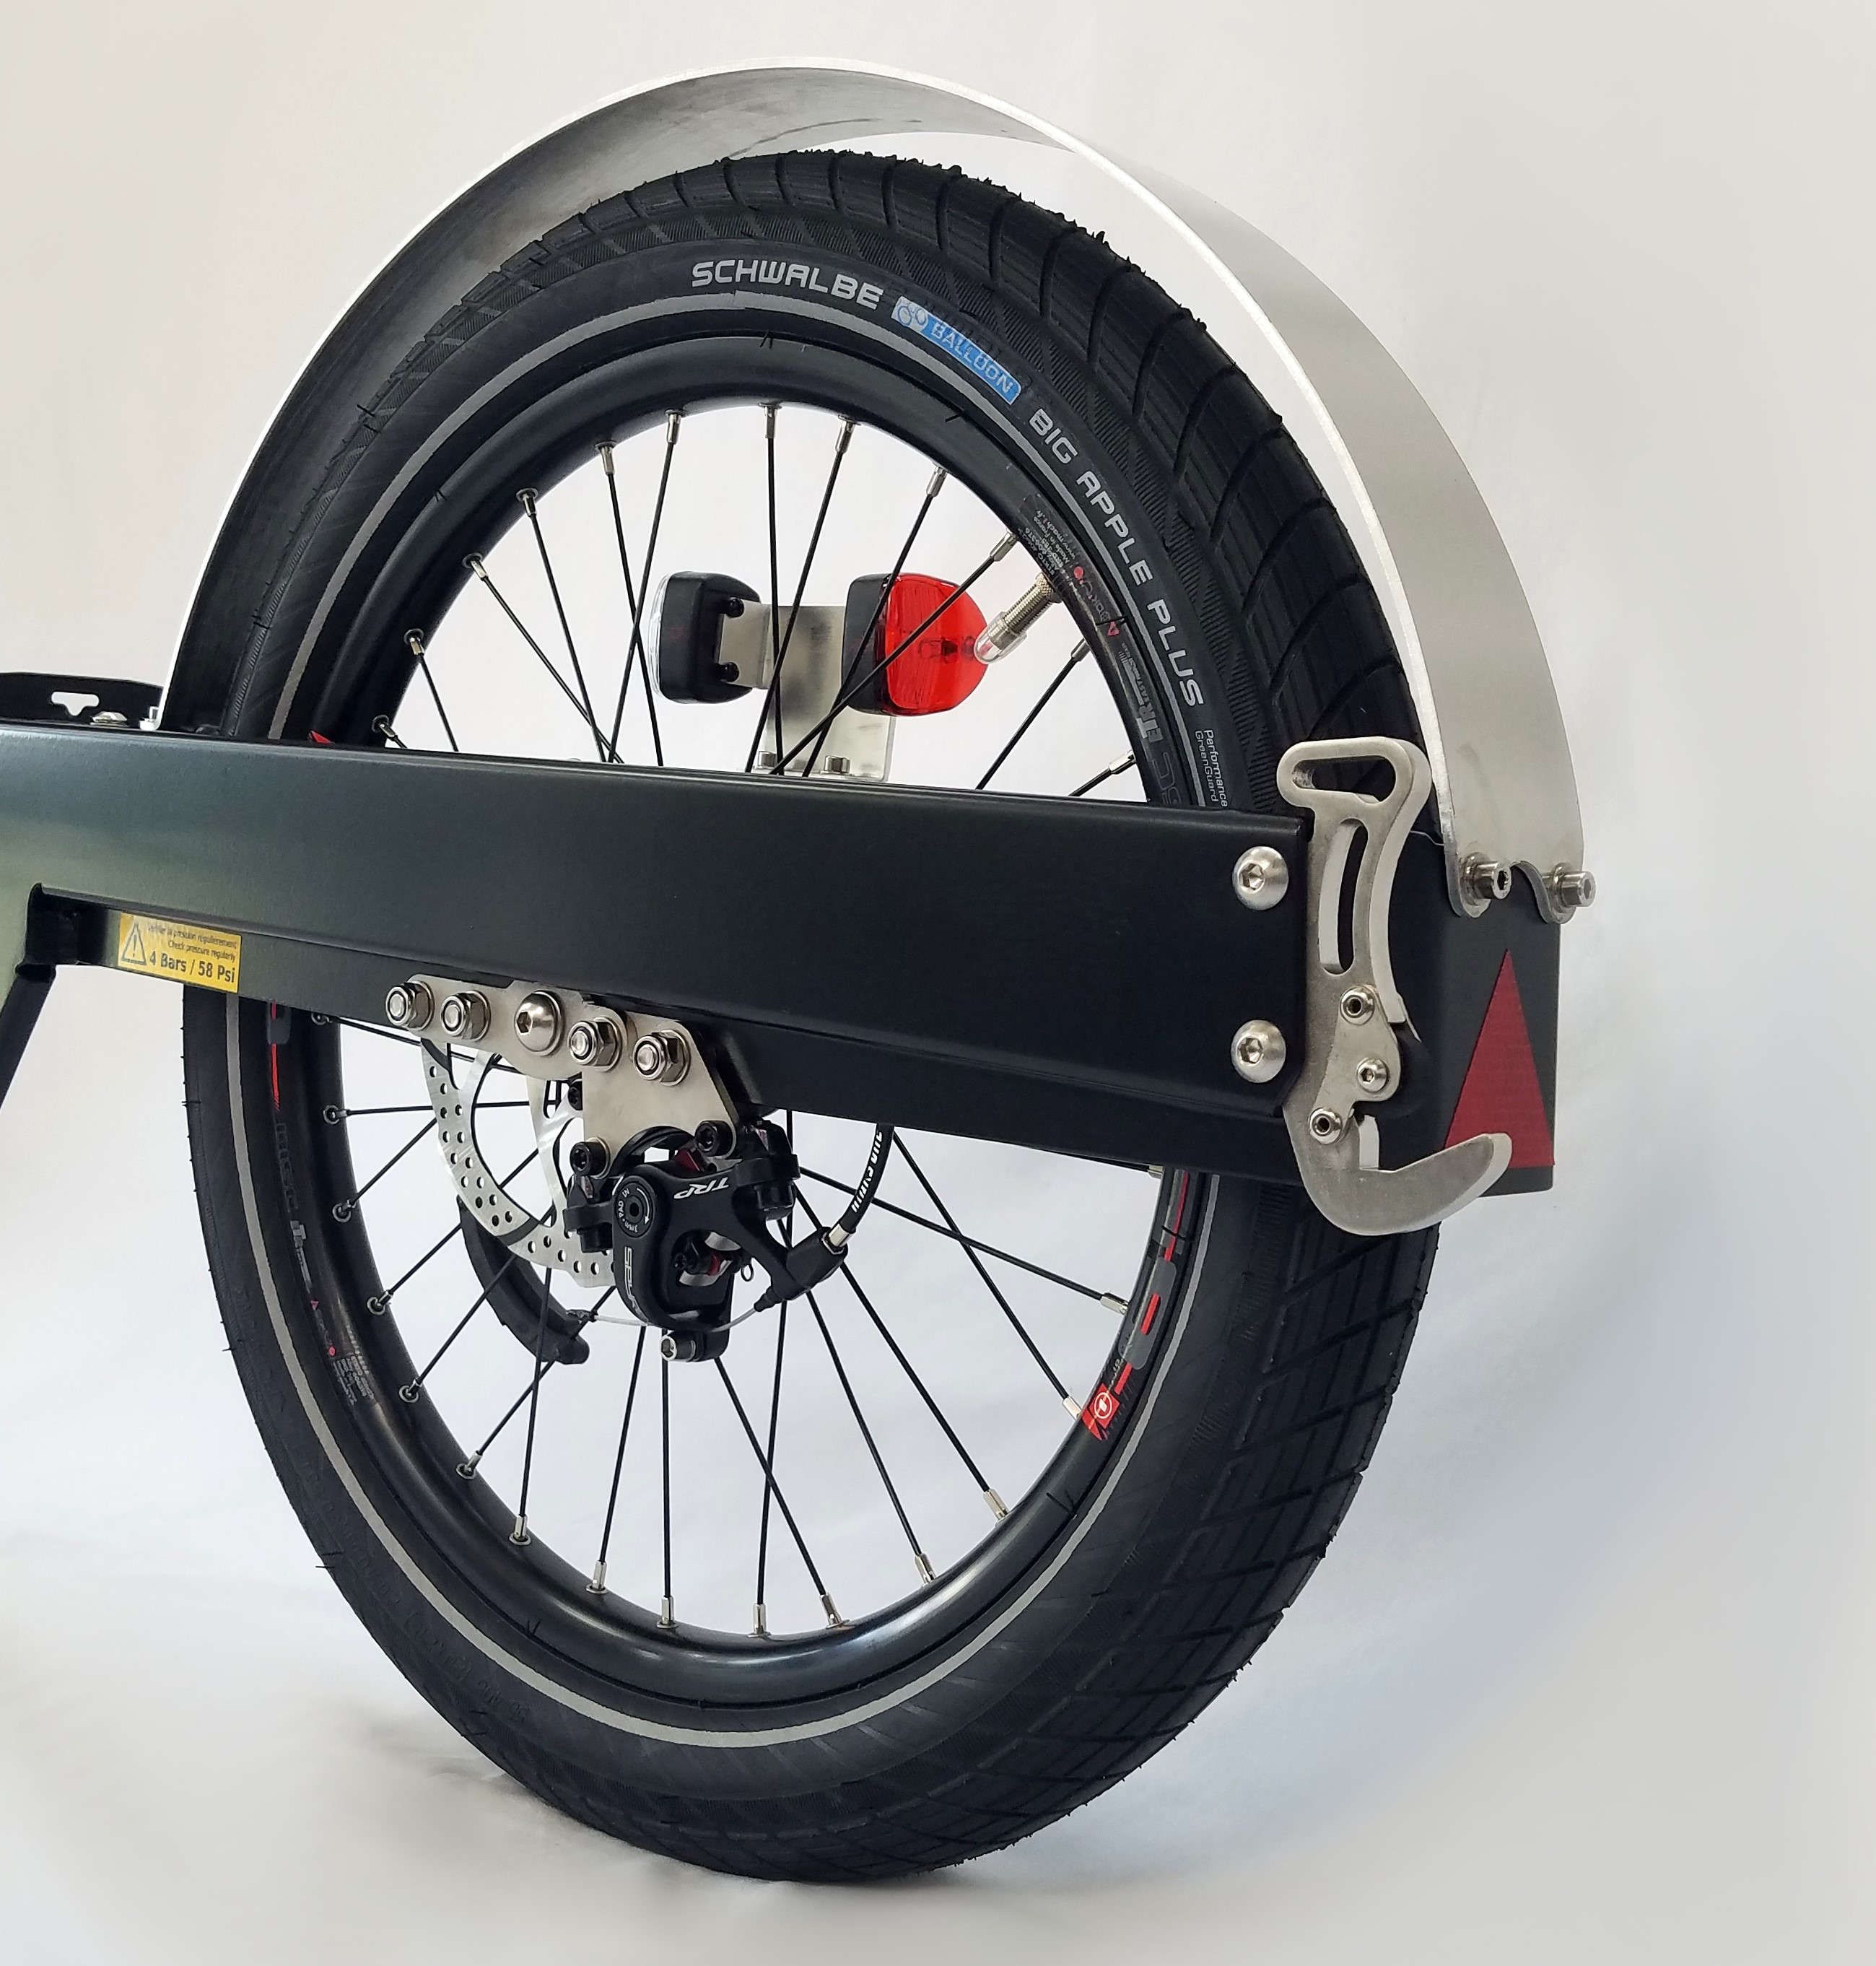 Part of a bike trailer with wheel, disc brake, hook, mudguard and a red and white light